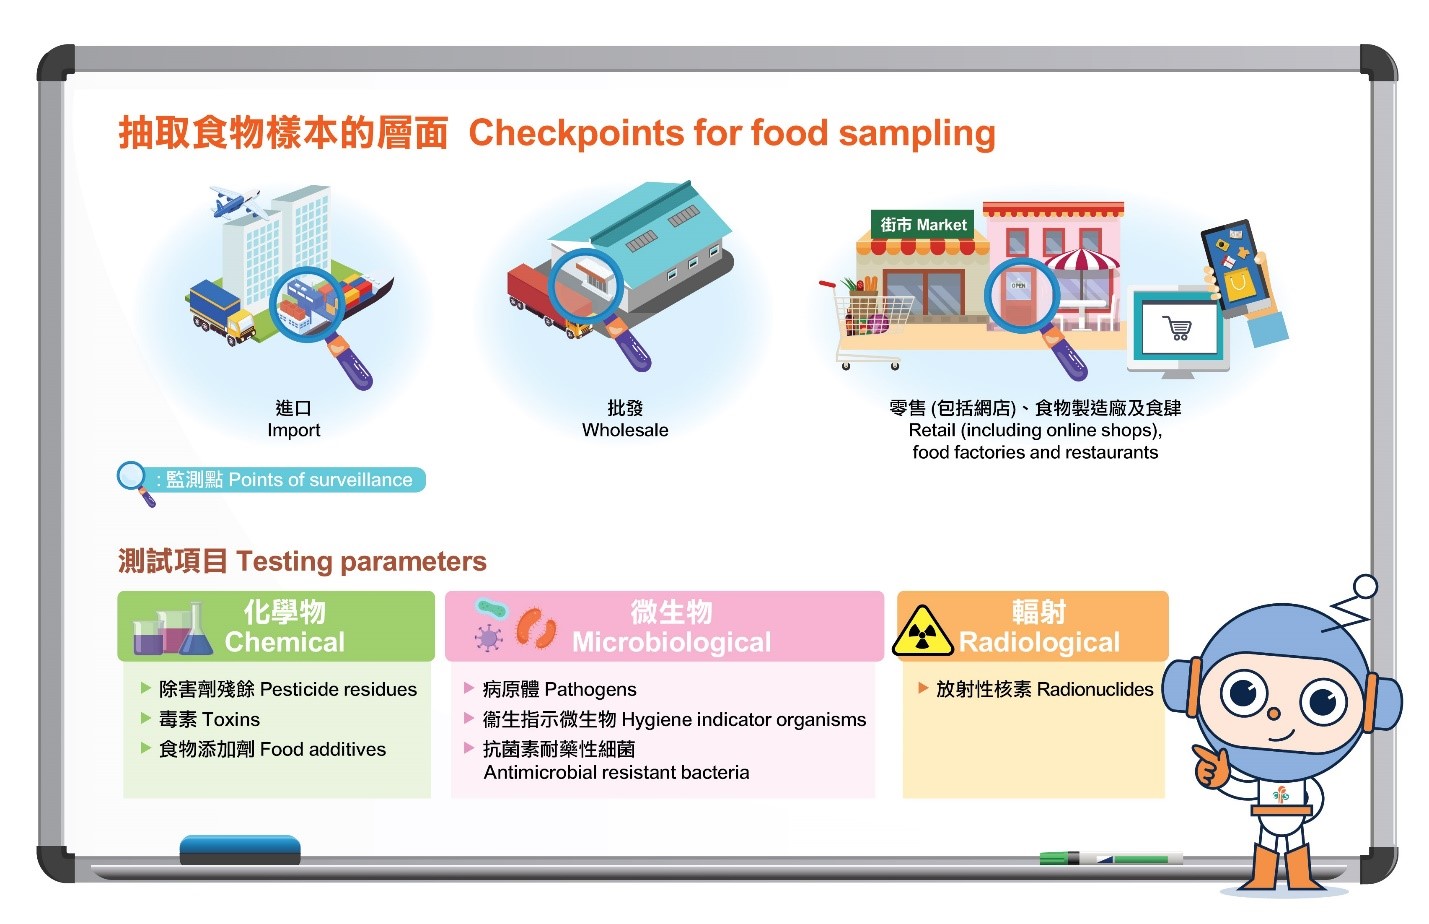 Checkpoints for food sampling